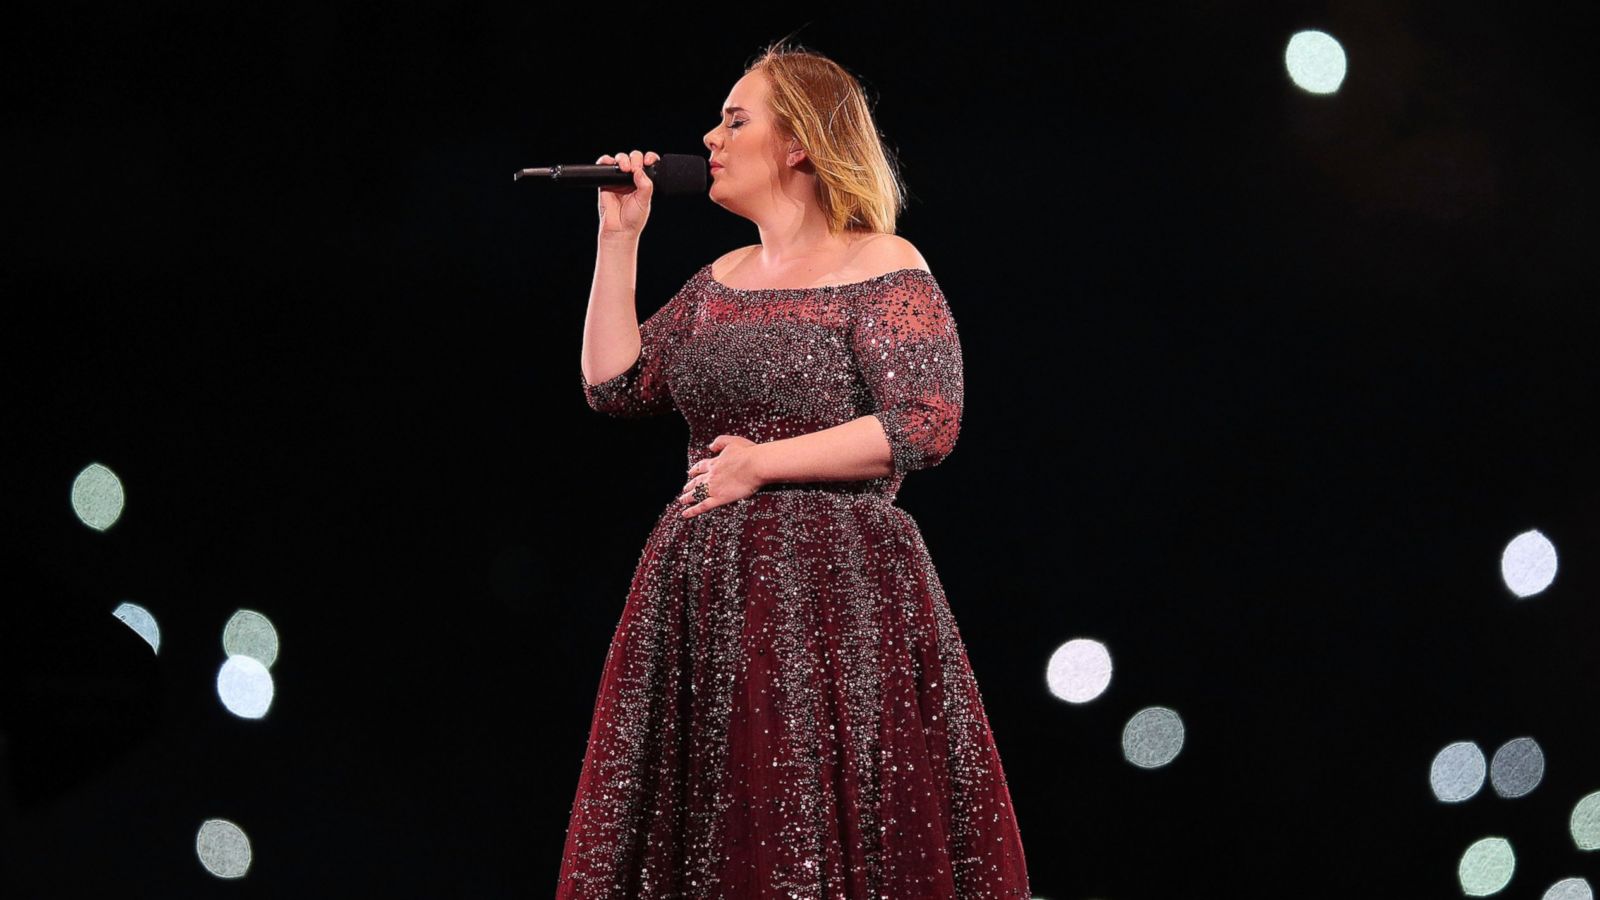 Adele 'held back in speech' and 'wore Disney dress' as she